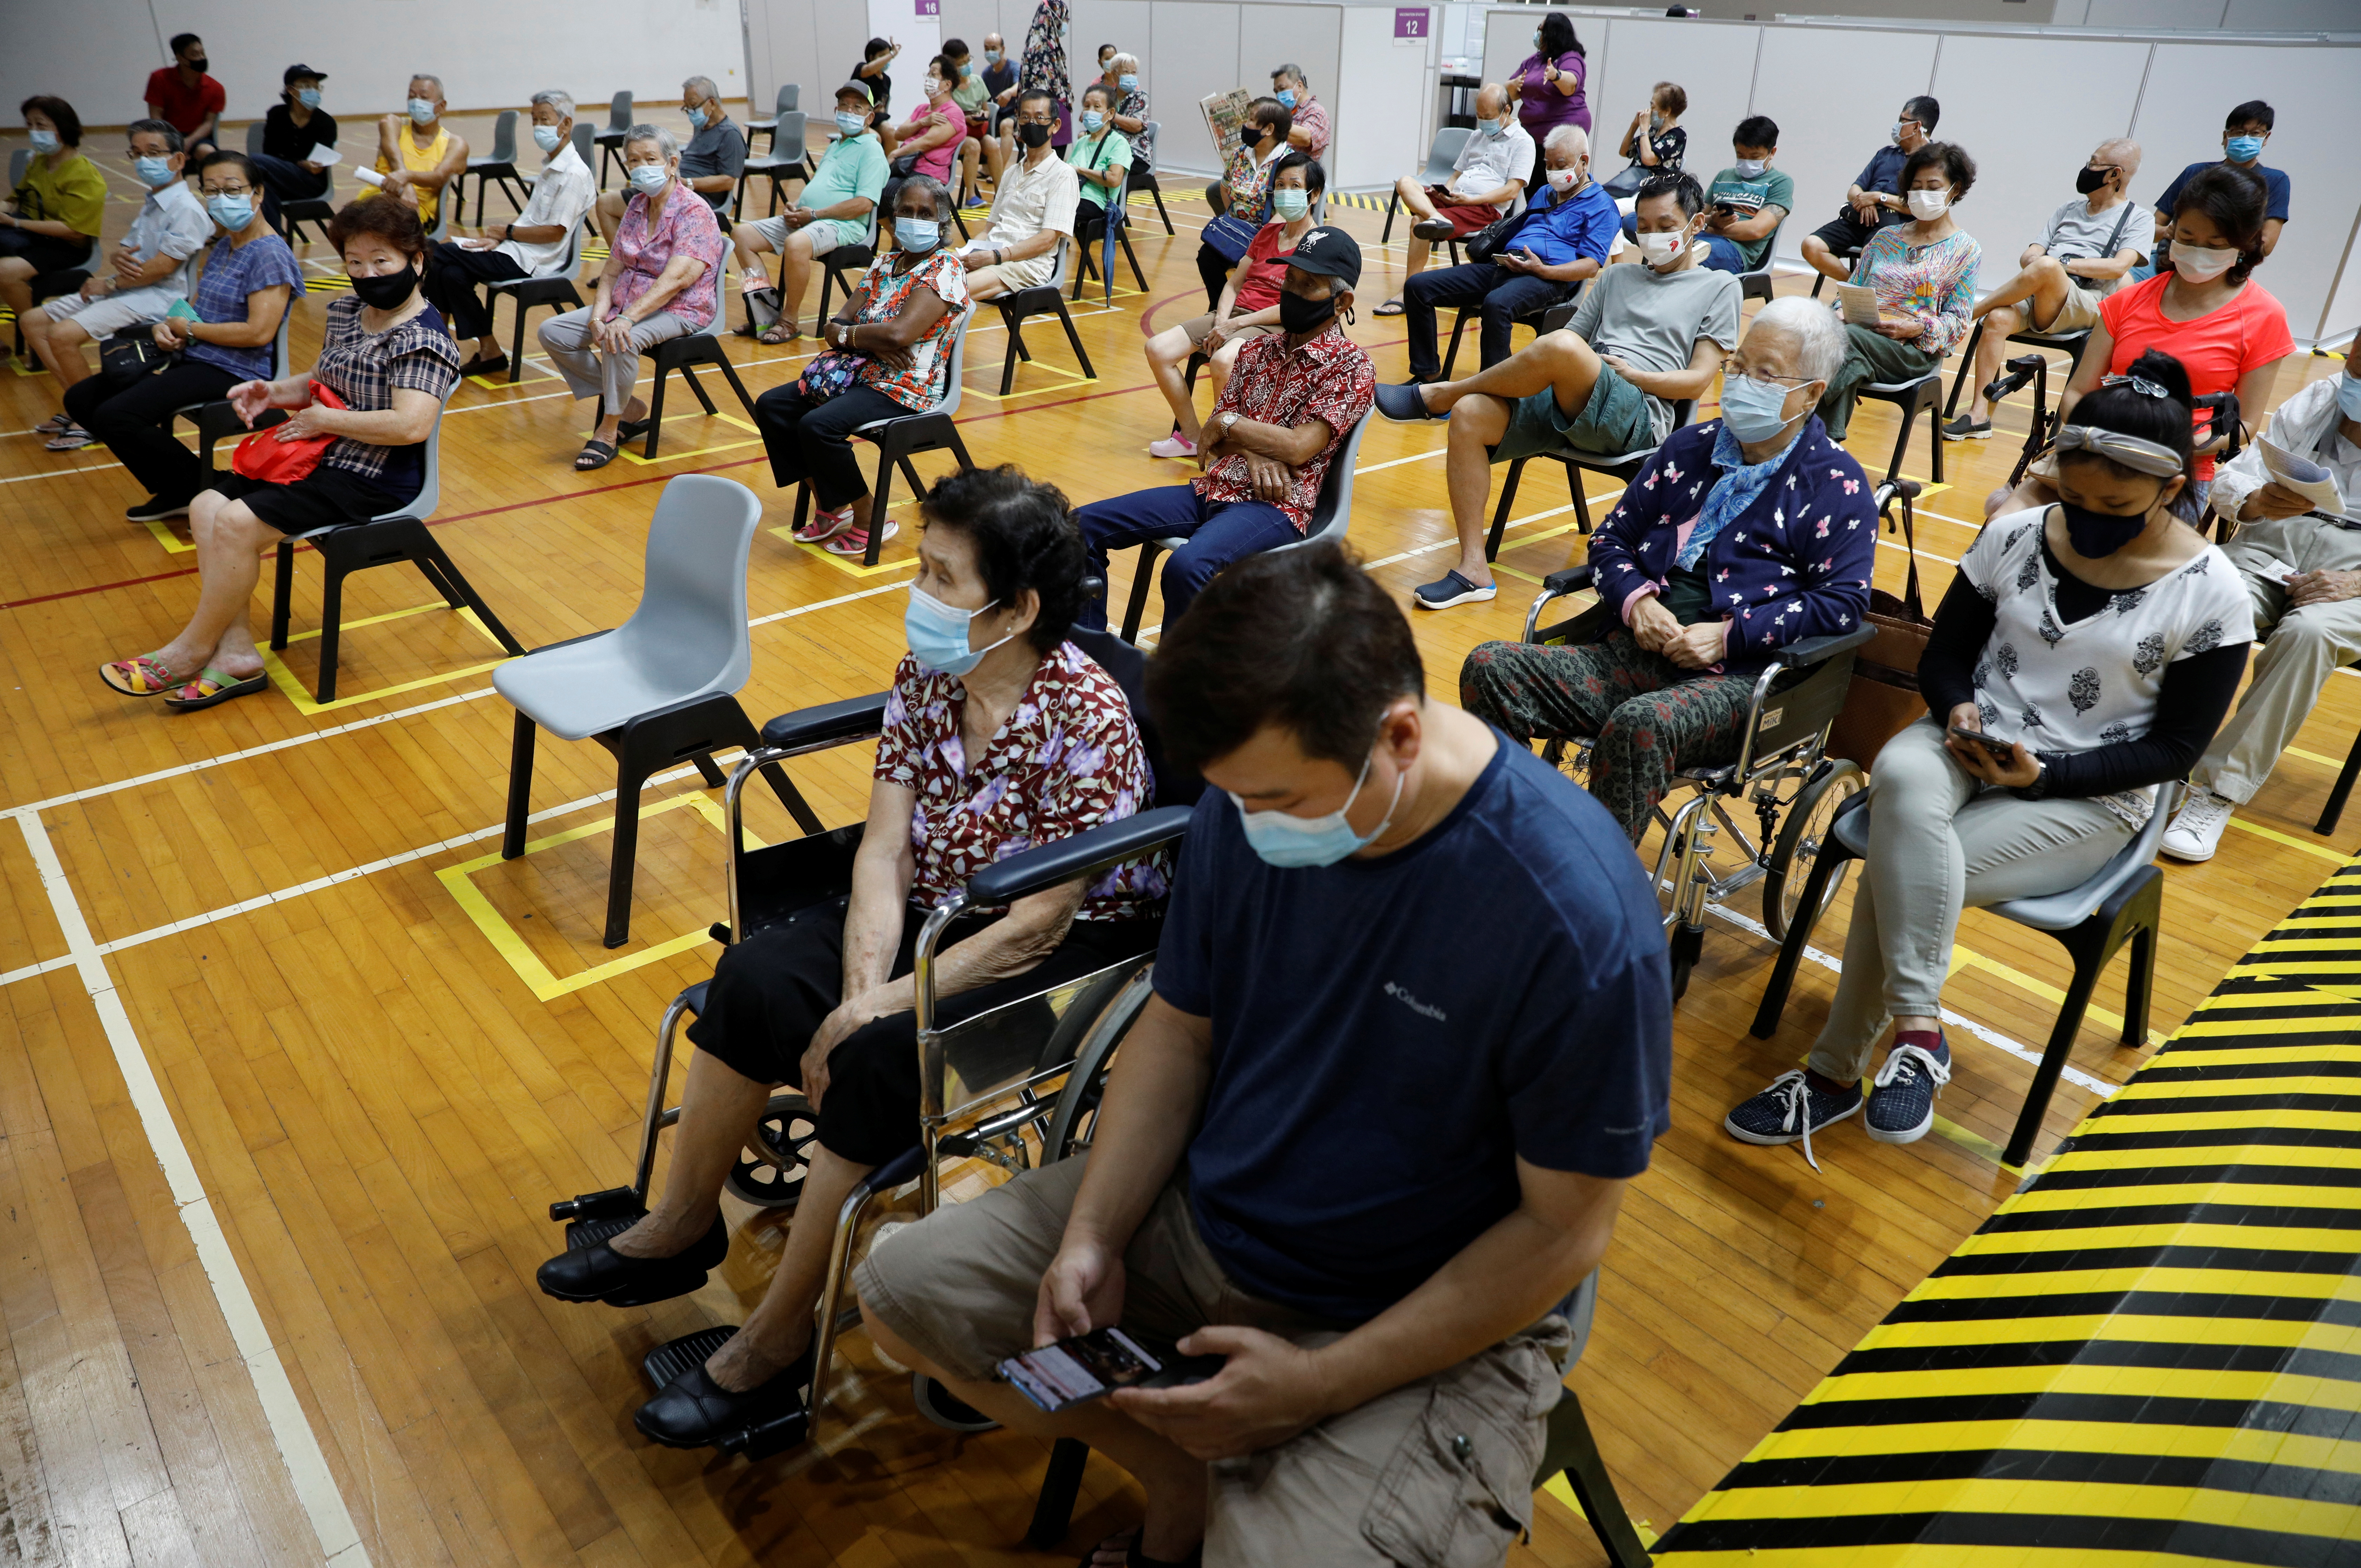 People wait at an observation area after their vaccination at a coronavirus disease (COVID-19) vaccination center in Singapore March 8, 2021. REUTERS/Edgar Su